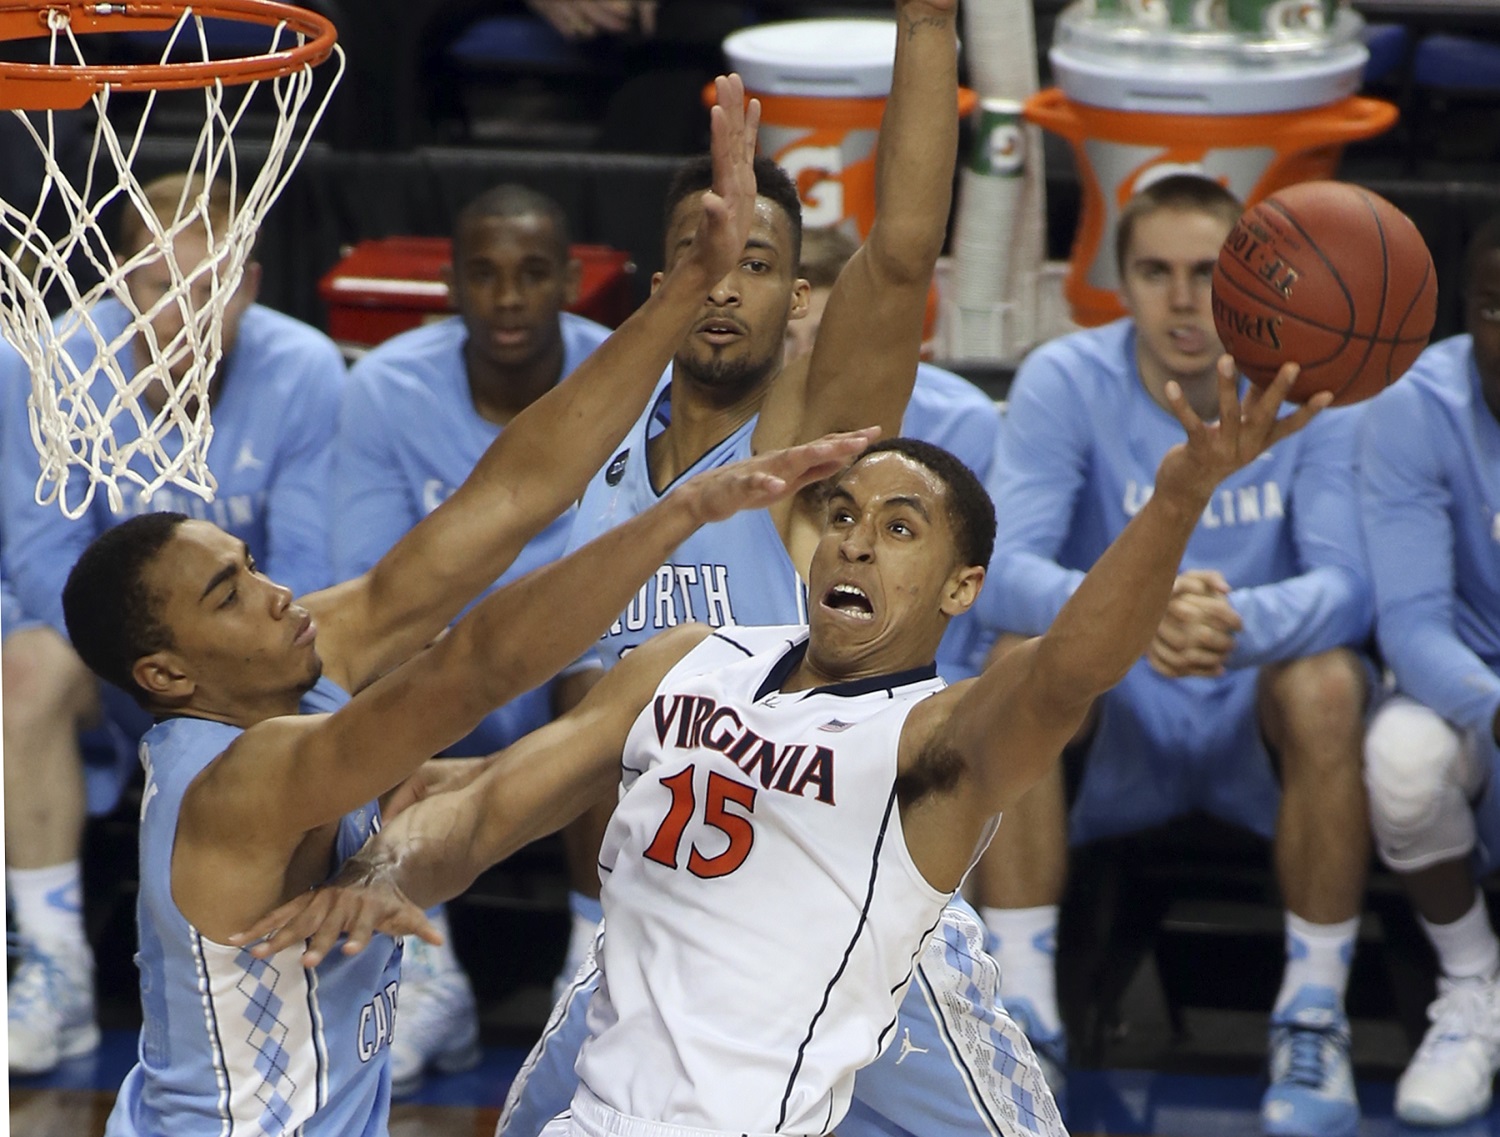 File-This March 13, 2015, file photo shows Virginia's Malcolm Brogdon (15) shooting against North Carolina's Brice Johnson, left, during the first half of an NCAA college basketball game in Greensboro, N.C. The Cavaliers have changed their expectations after consecutive 30-win seasons and ACC regular season titles, but have been ousted from the NCAA tournament in both years by Michigan State. With four seniors in the rotation, this is their last chance to bring Virginia a national championship.(AP Photo/Bob Jordan, File)